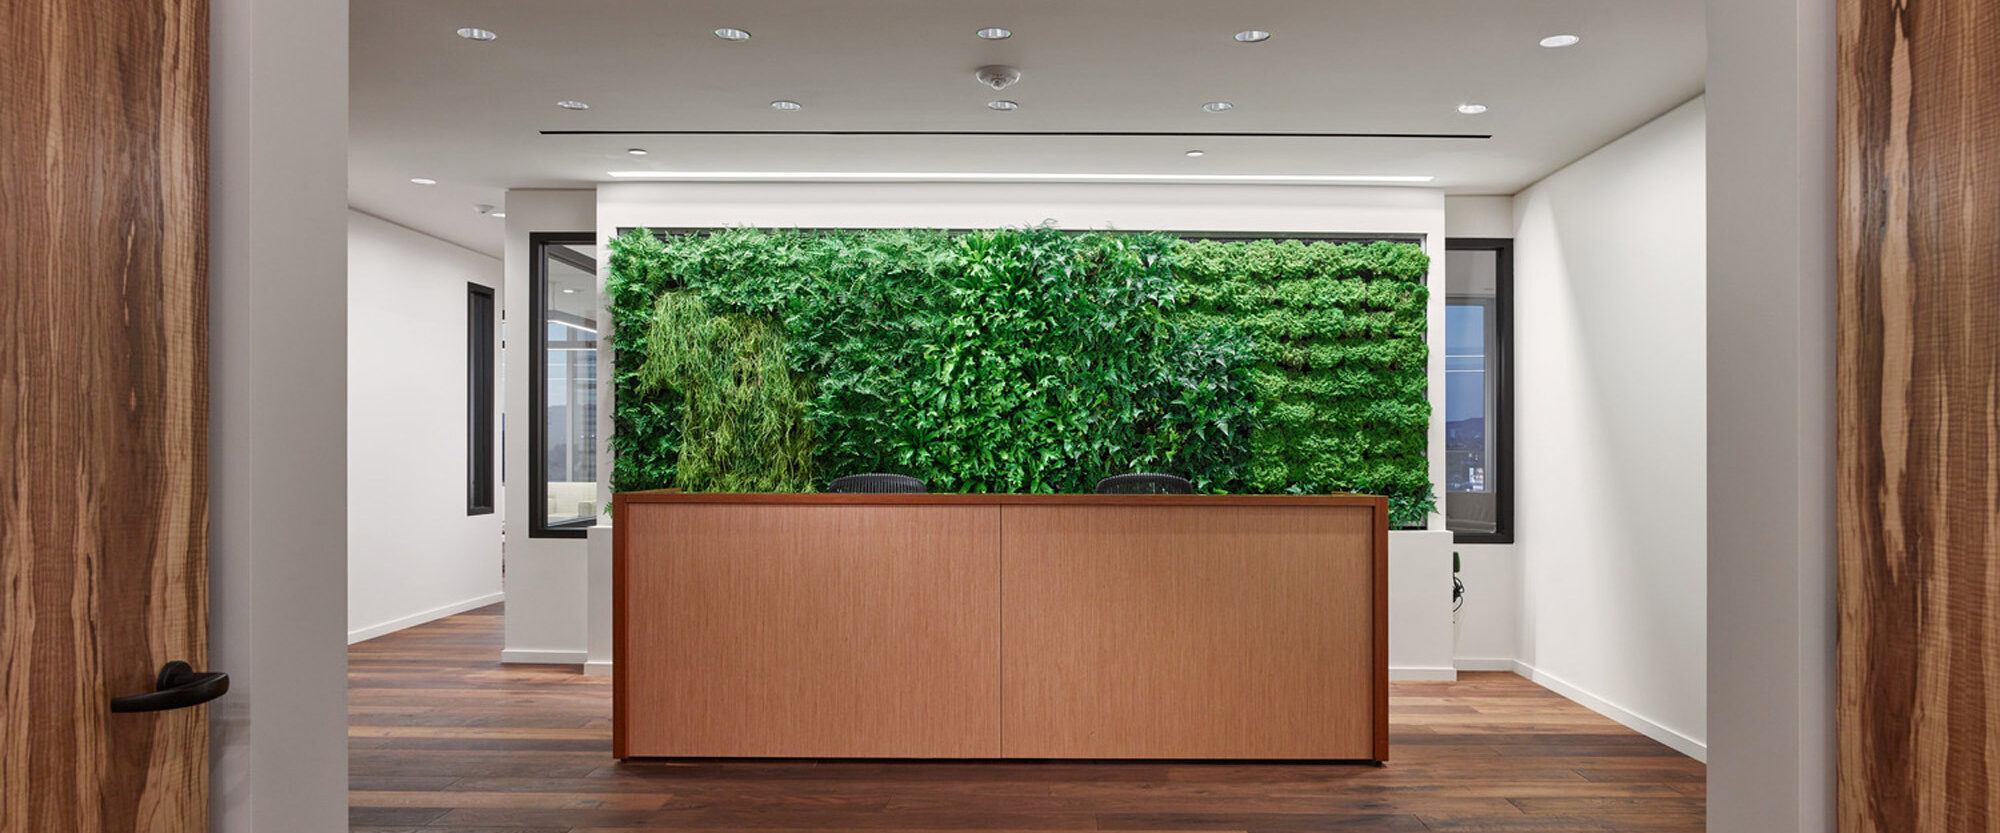 Elegantly minimalist reception area with rich walnut wood panels flanking a simple yet sophisticated wooden desk, complemented by herringbone-patterned floors and a lush green living wall that brings a vibrant, natural touch to the modern space.